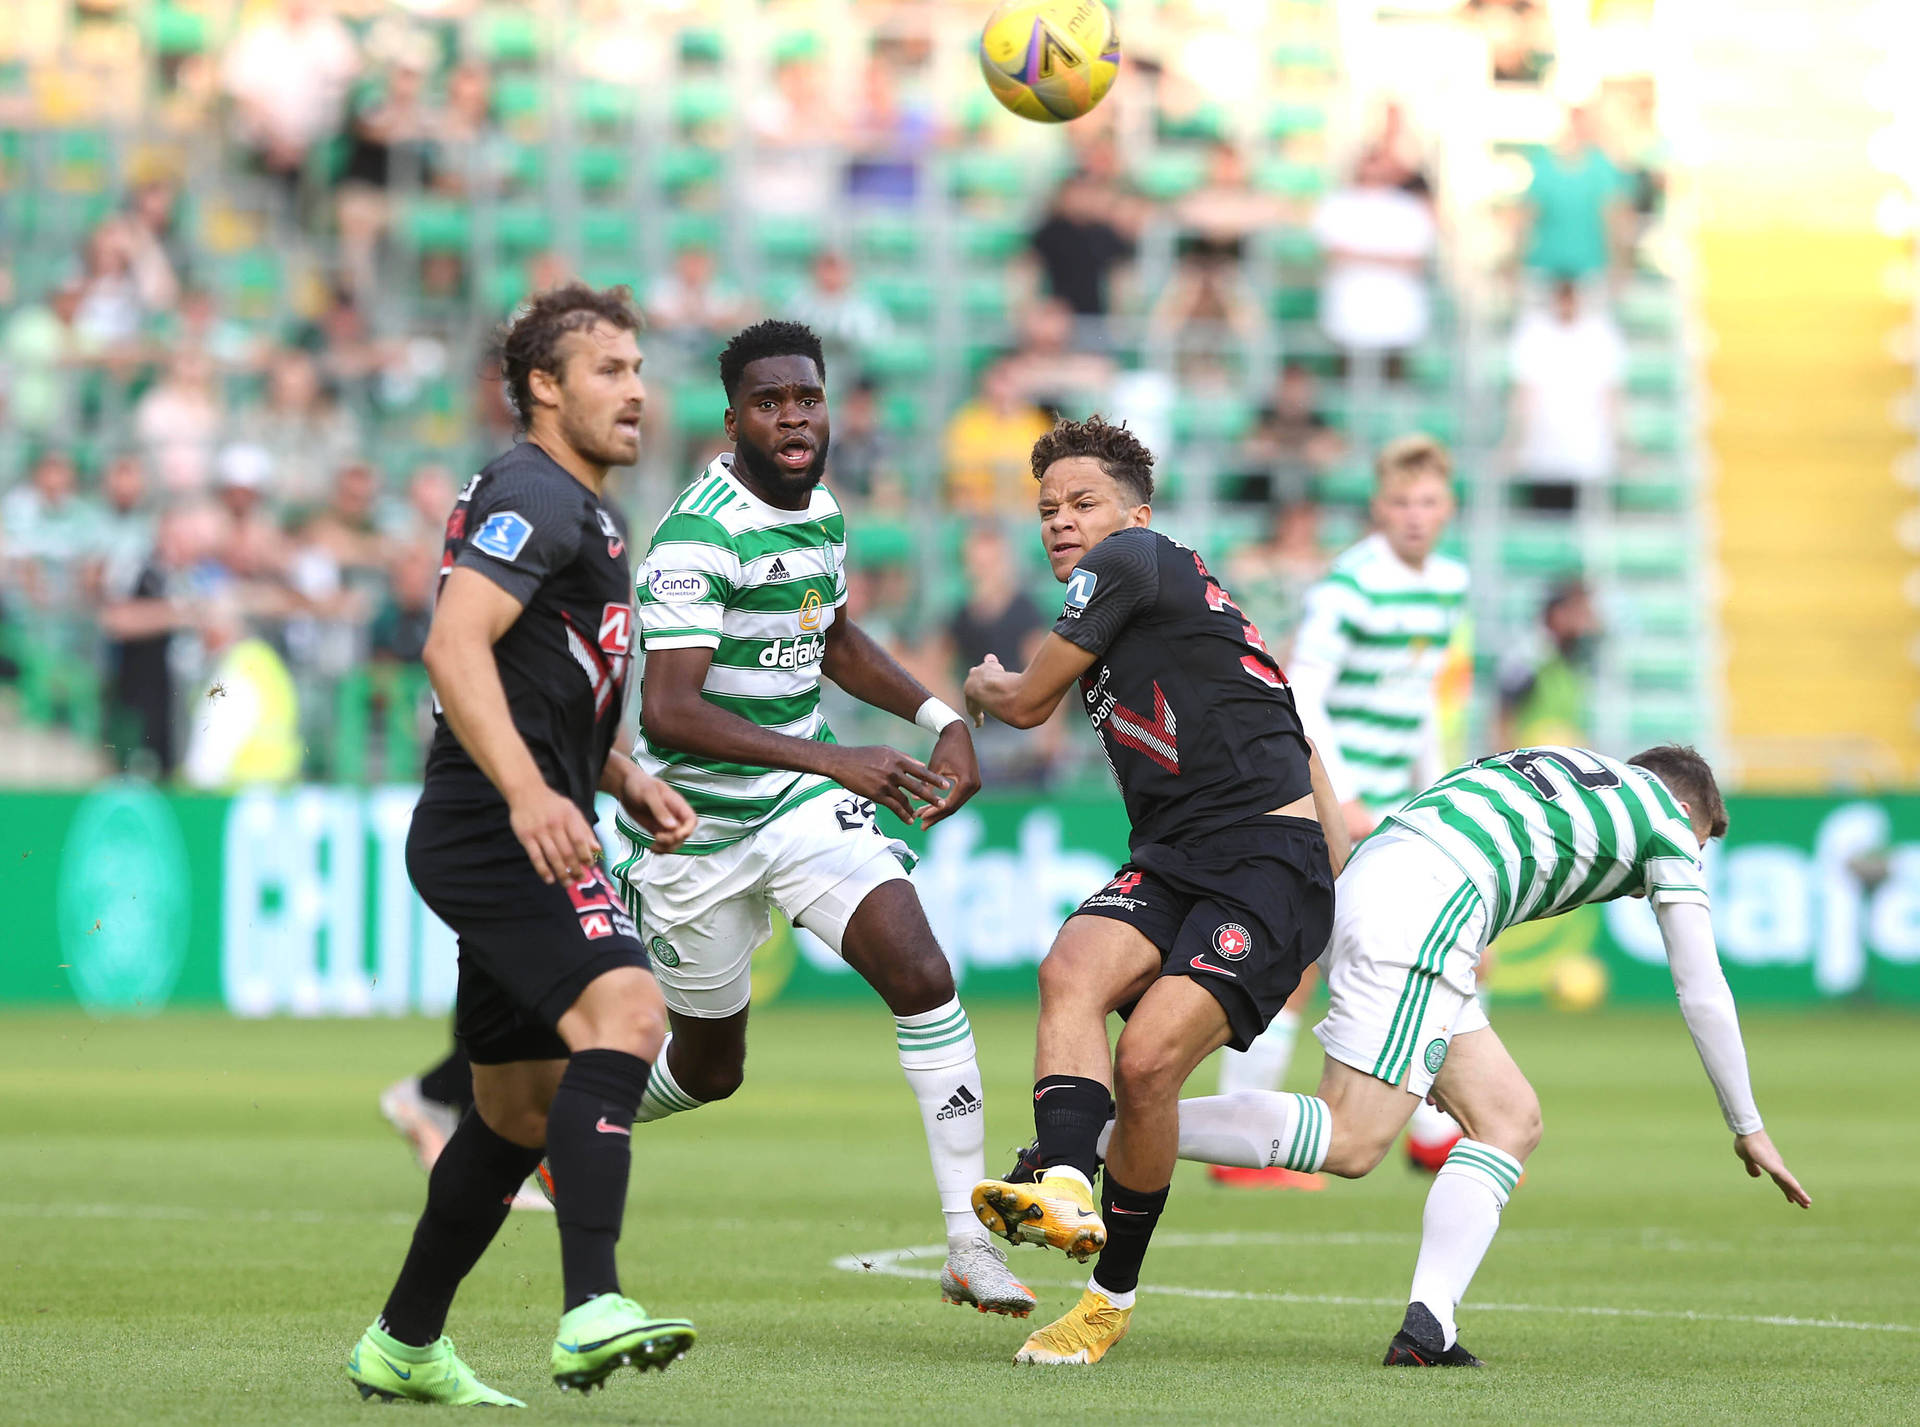 Odsonne Edouard chasing the ball in action Wallpaper